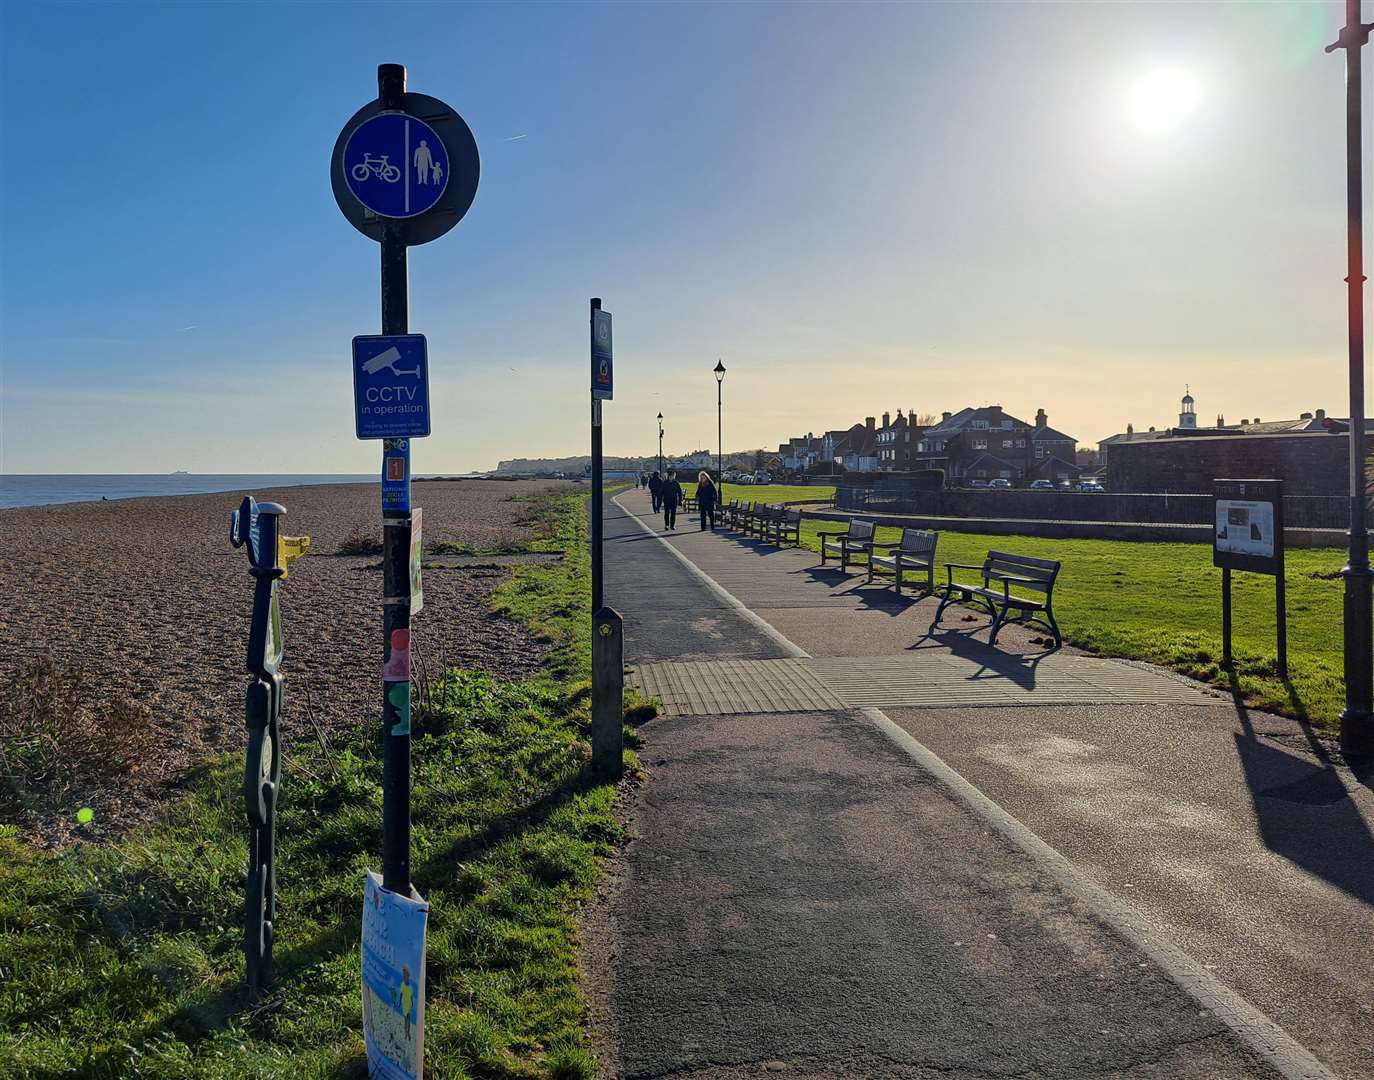 Deal seafront south of the castle where the path is clearly divided between cyclists and pedestrians